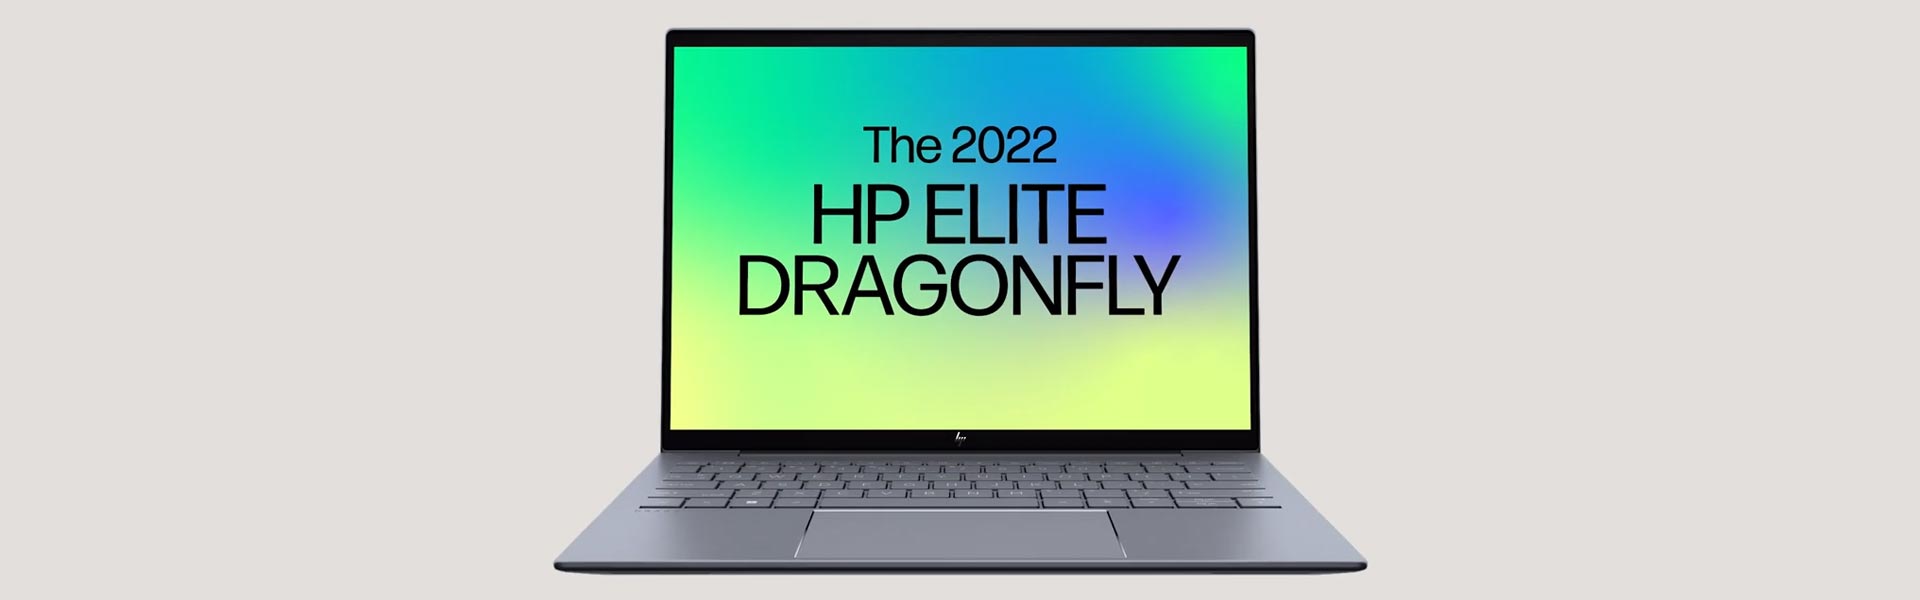 HP Dragonfly G3 Sizzle video